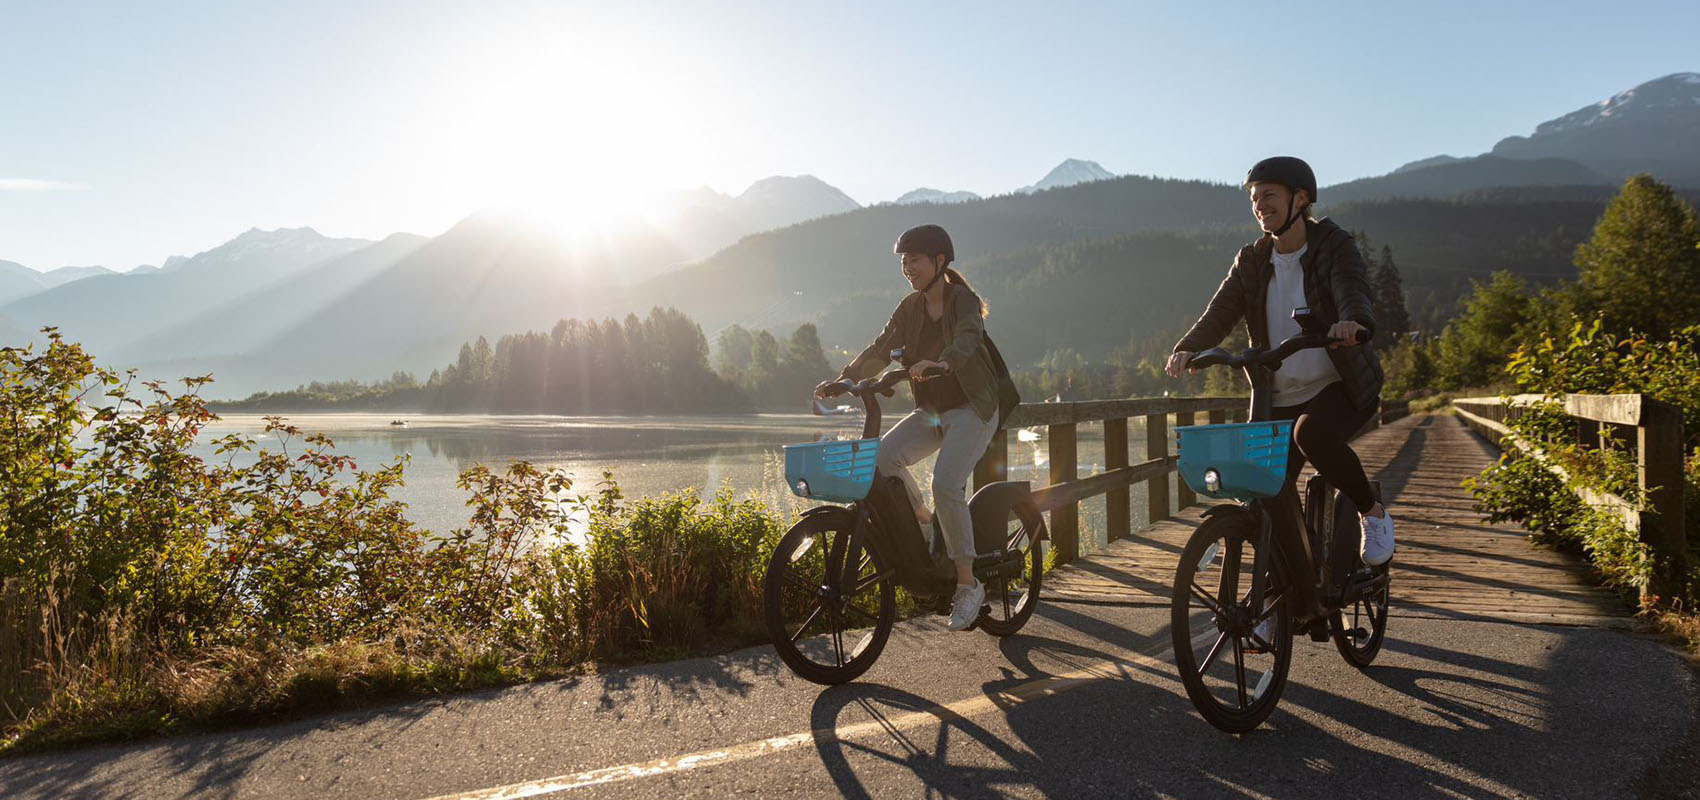 Two friends cycling over a wooden bridge with mountains in the background